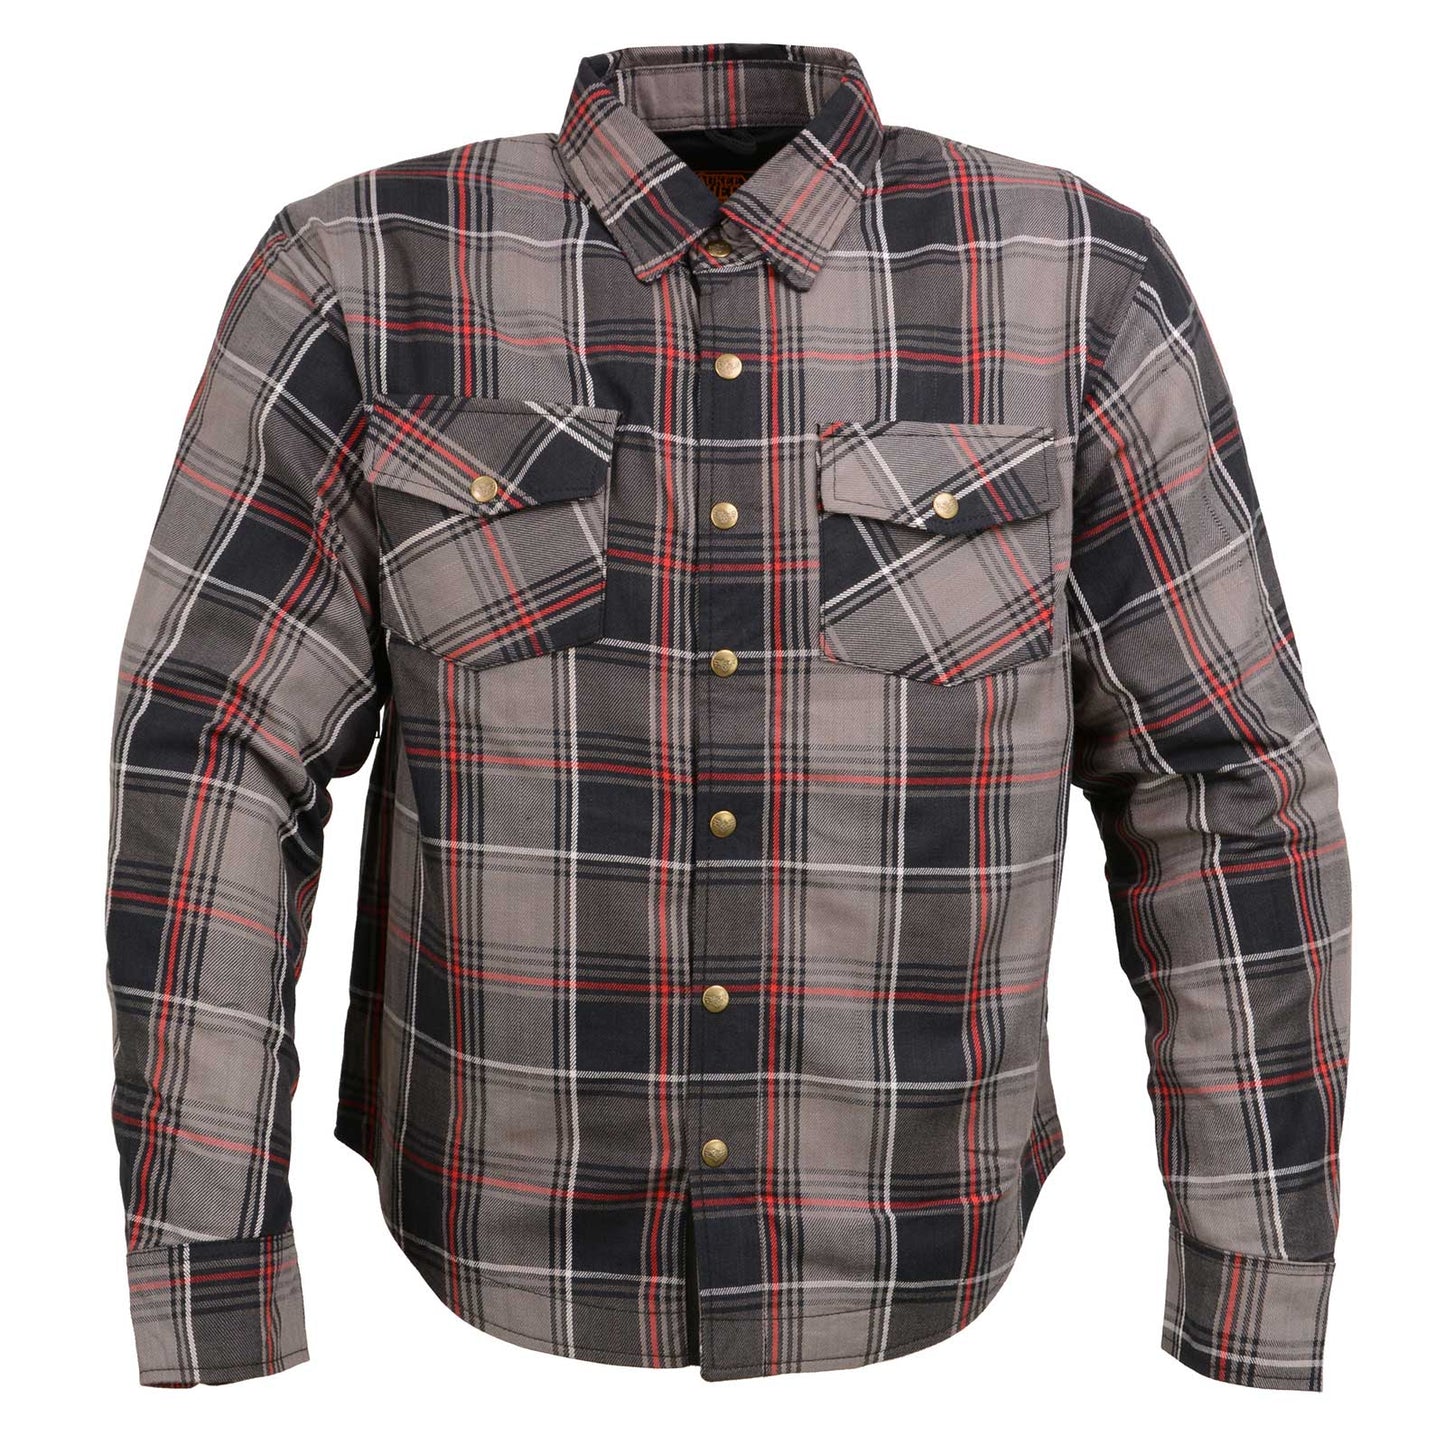 Milwaukee Leather MPM1652 Men's Plaid Flannel Biker Shirt with CE Approved Armor - Reinforced w/ Aramid Fiber